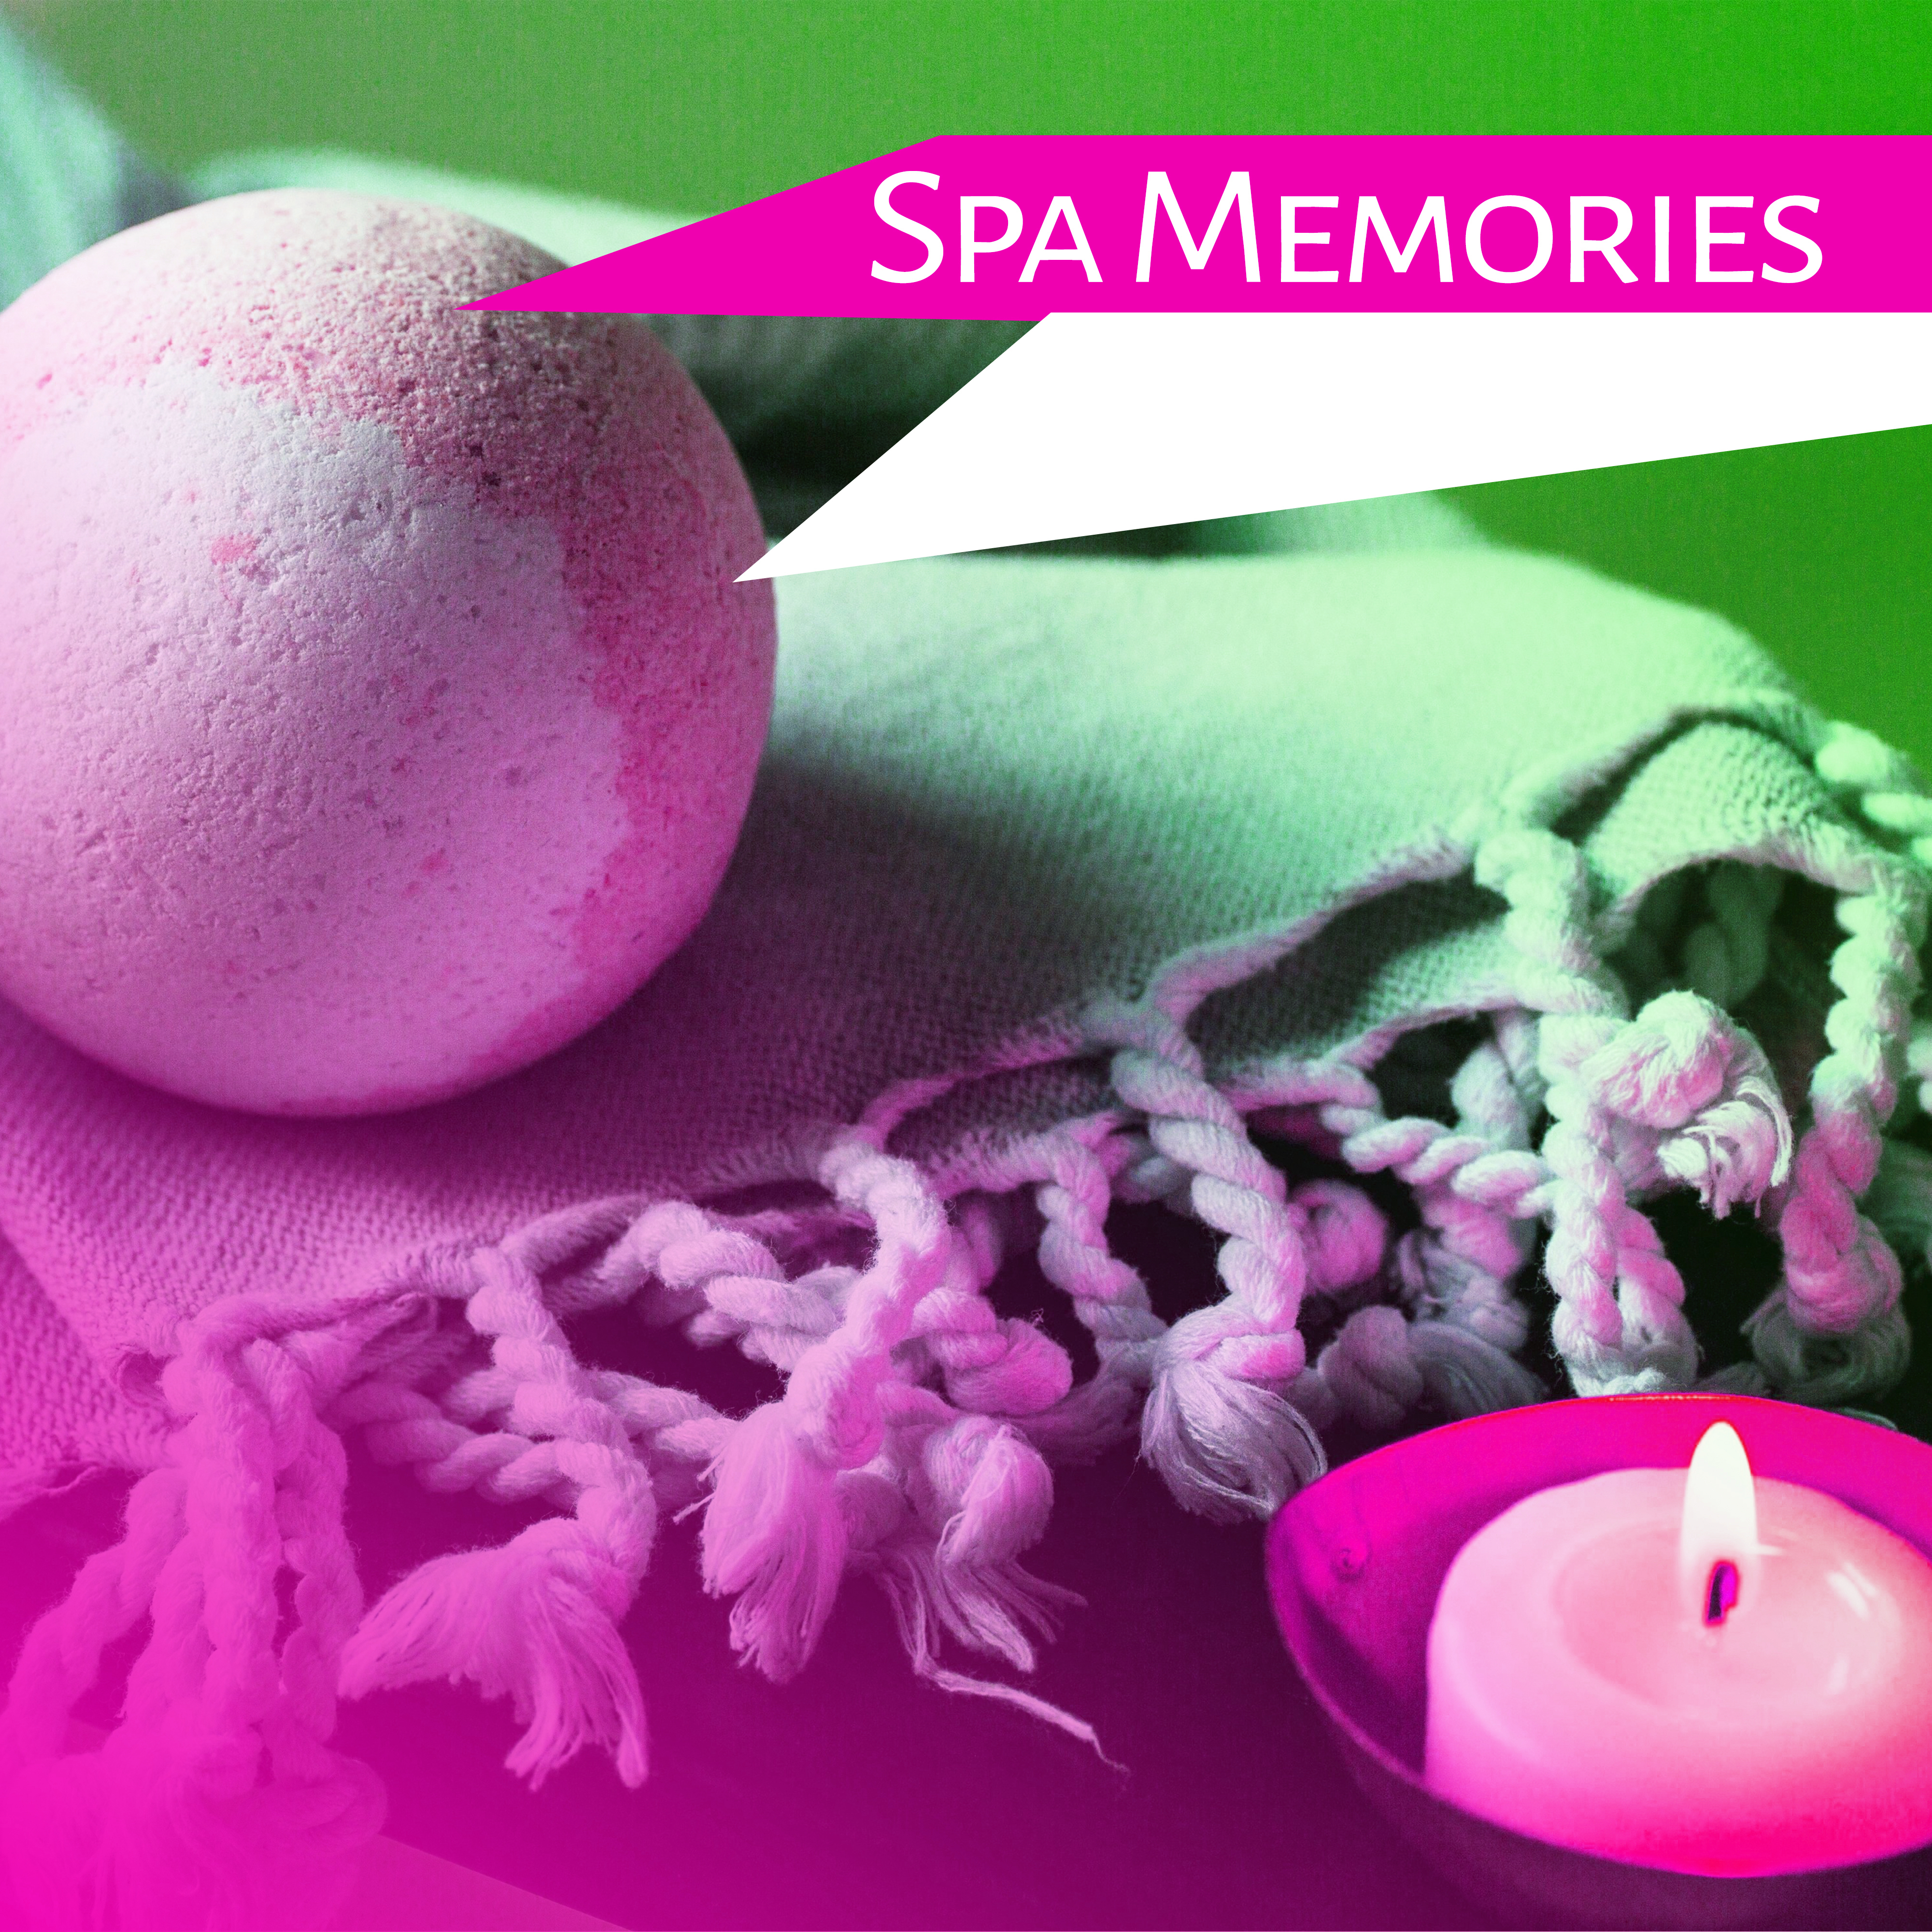 Spa Memories – Inner Healing, Spa & Massage, Stress Relief, Spa Home, Relax by Candlelight